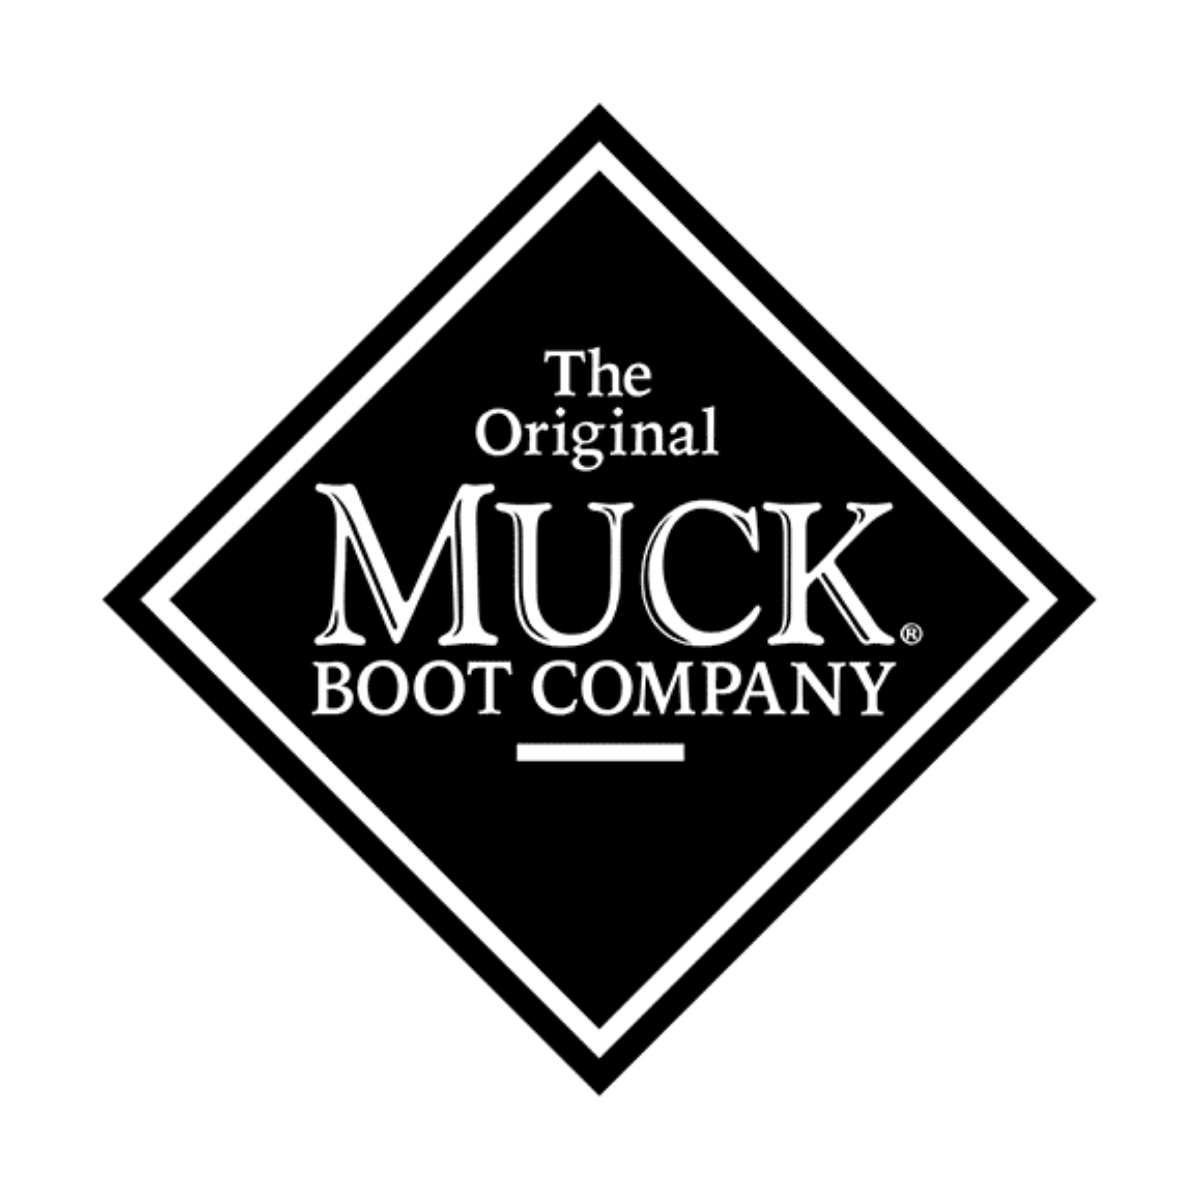 The Original Muck Boot Company – Tagged 